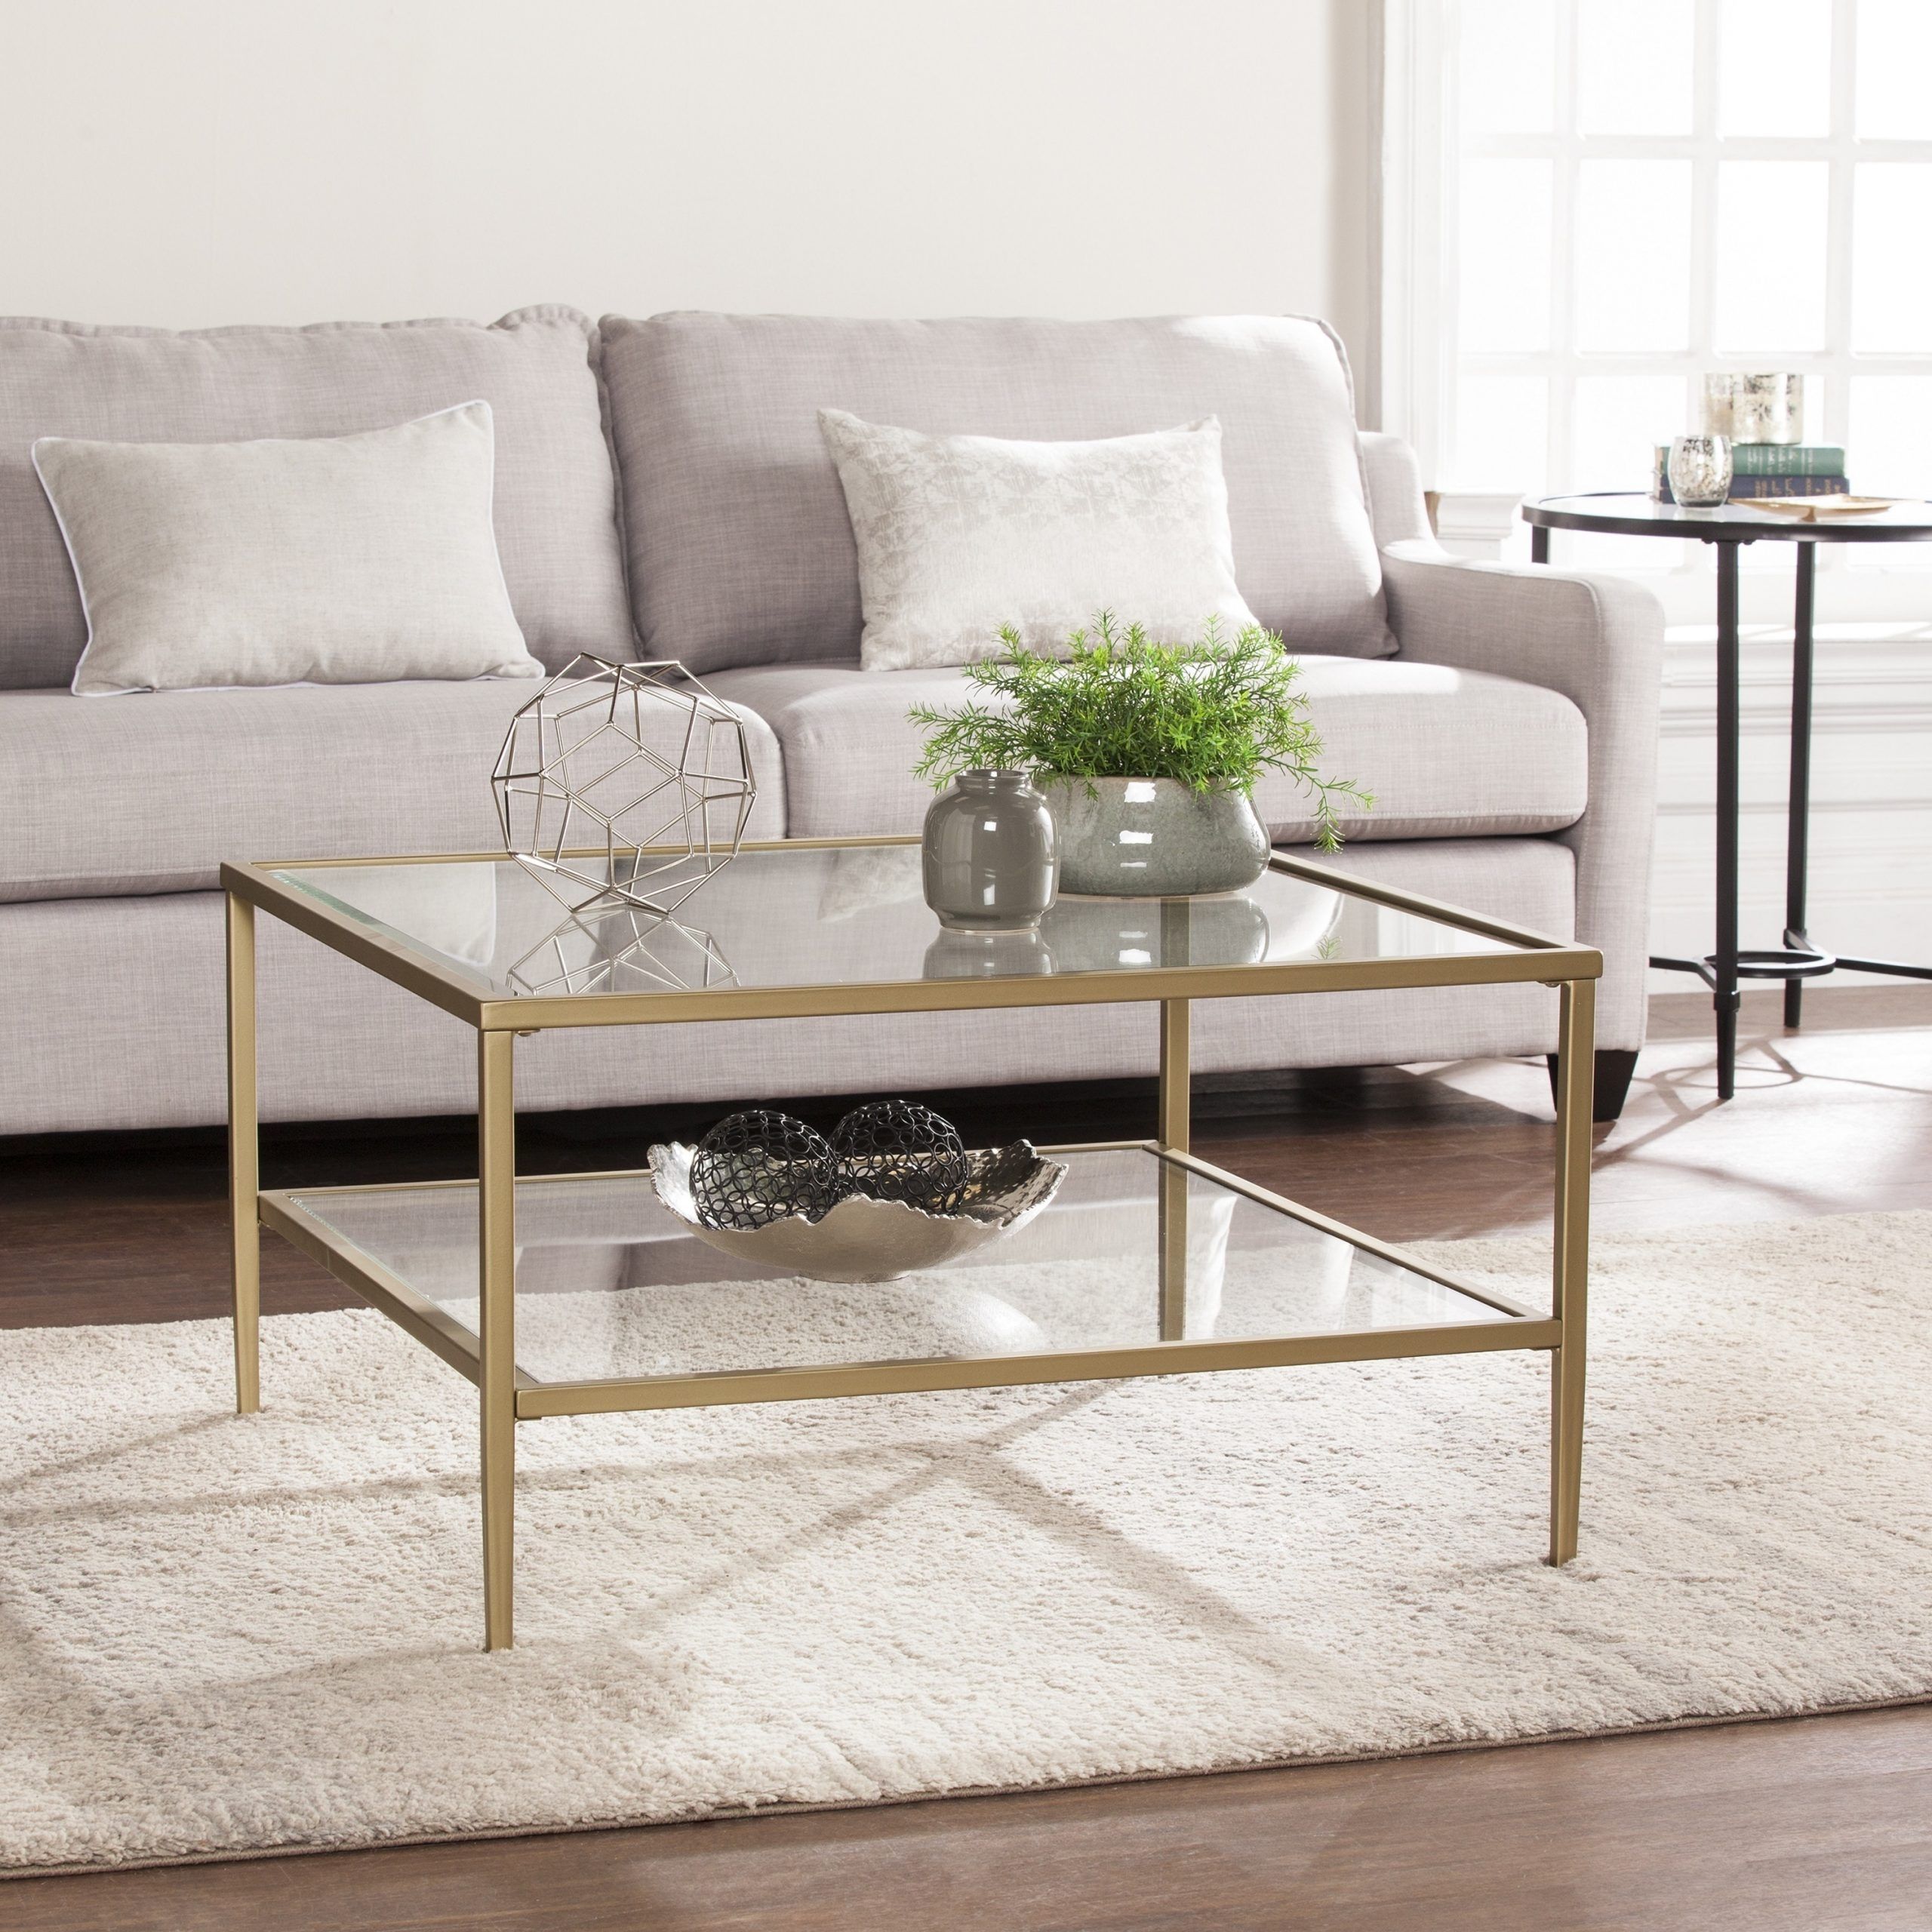 Shop Harper Blvd Kolder Square Metal/glass Open Shelf For 2019 Glass And Gold Coffee Tables (View 10 of 20)